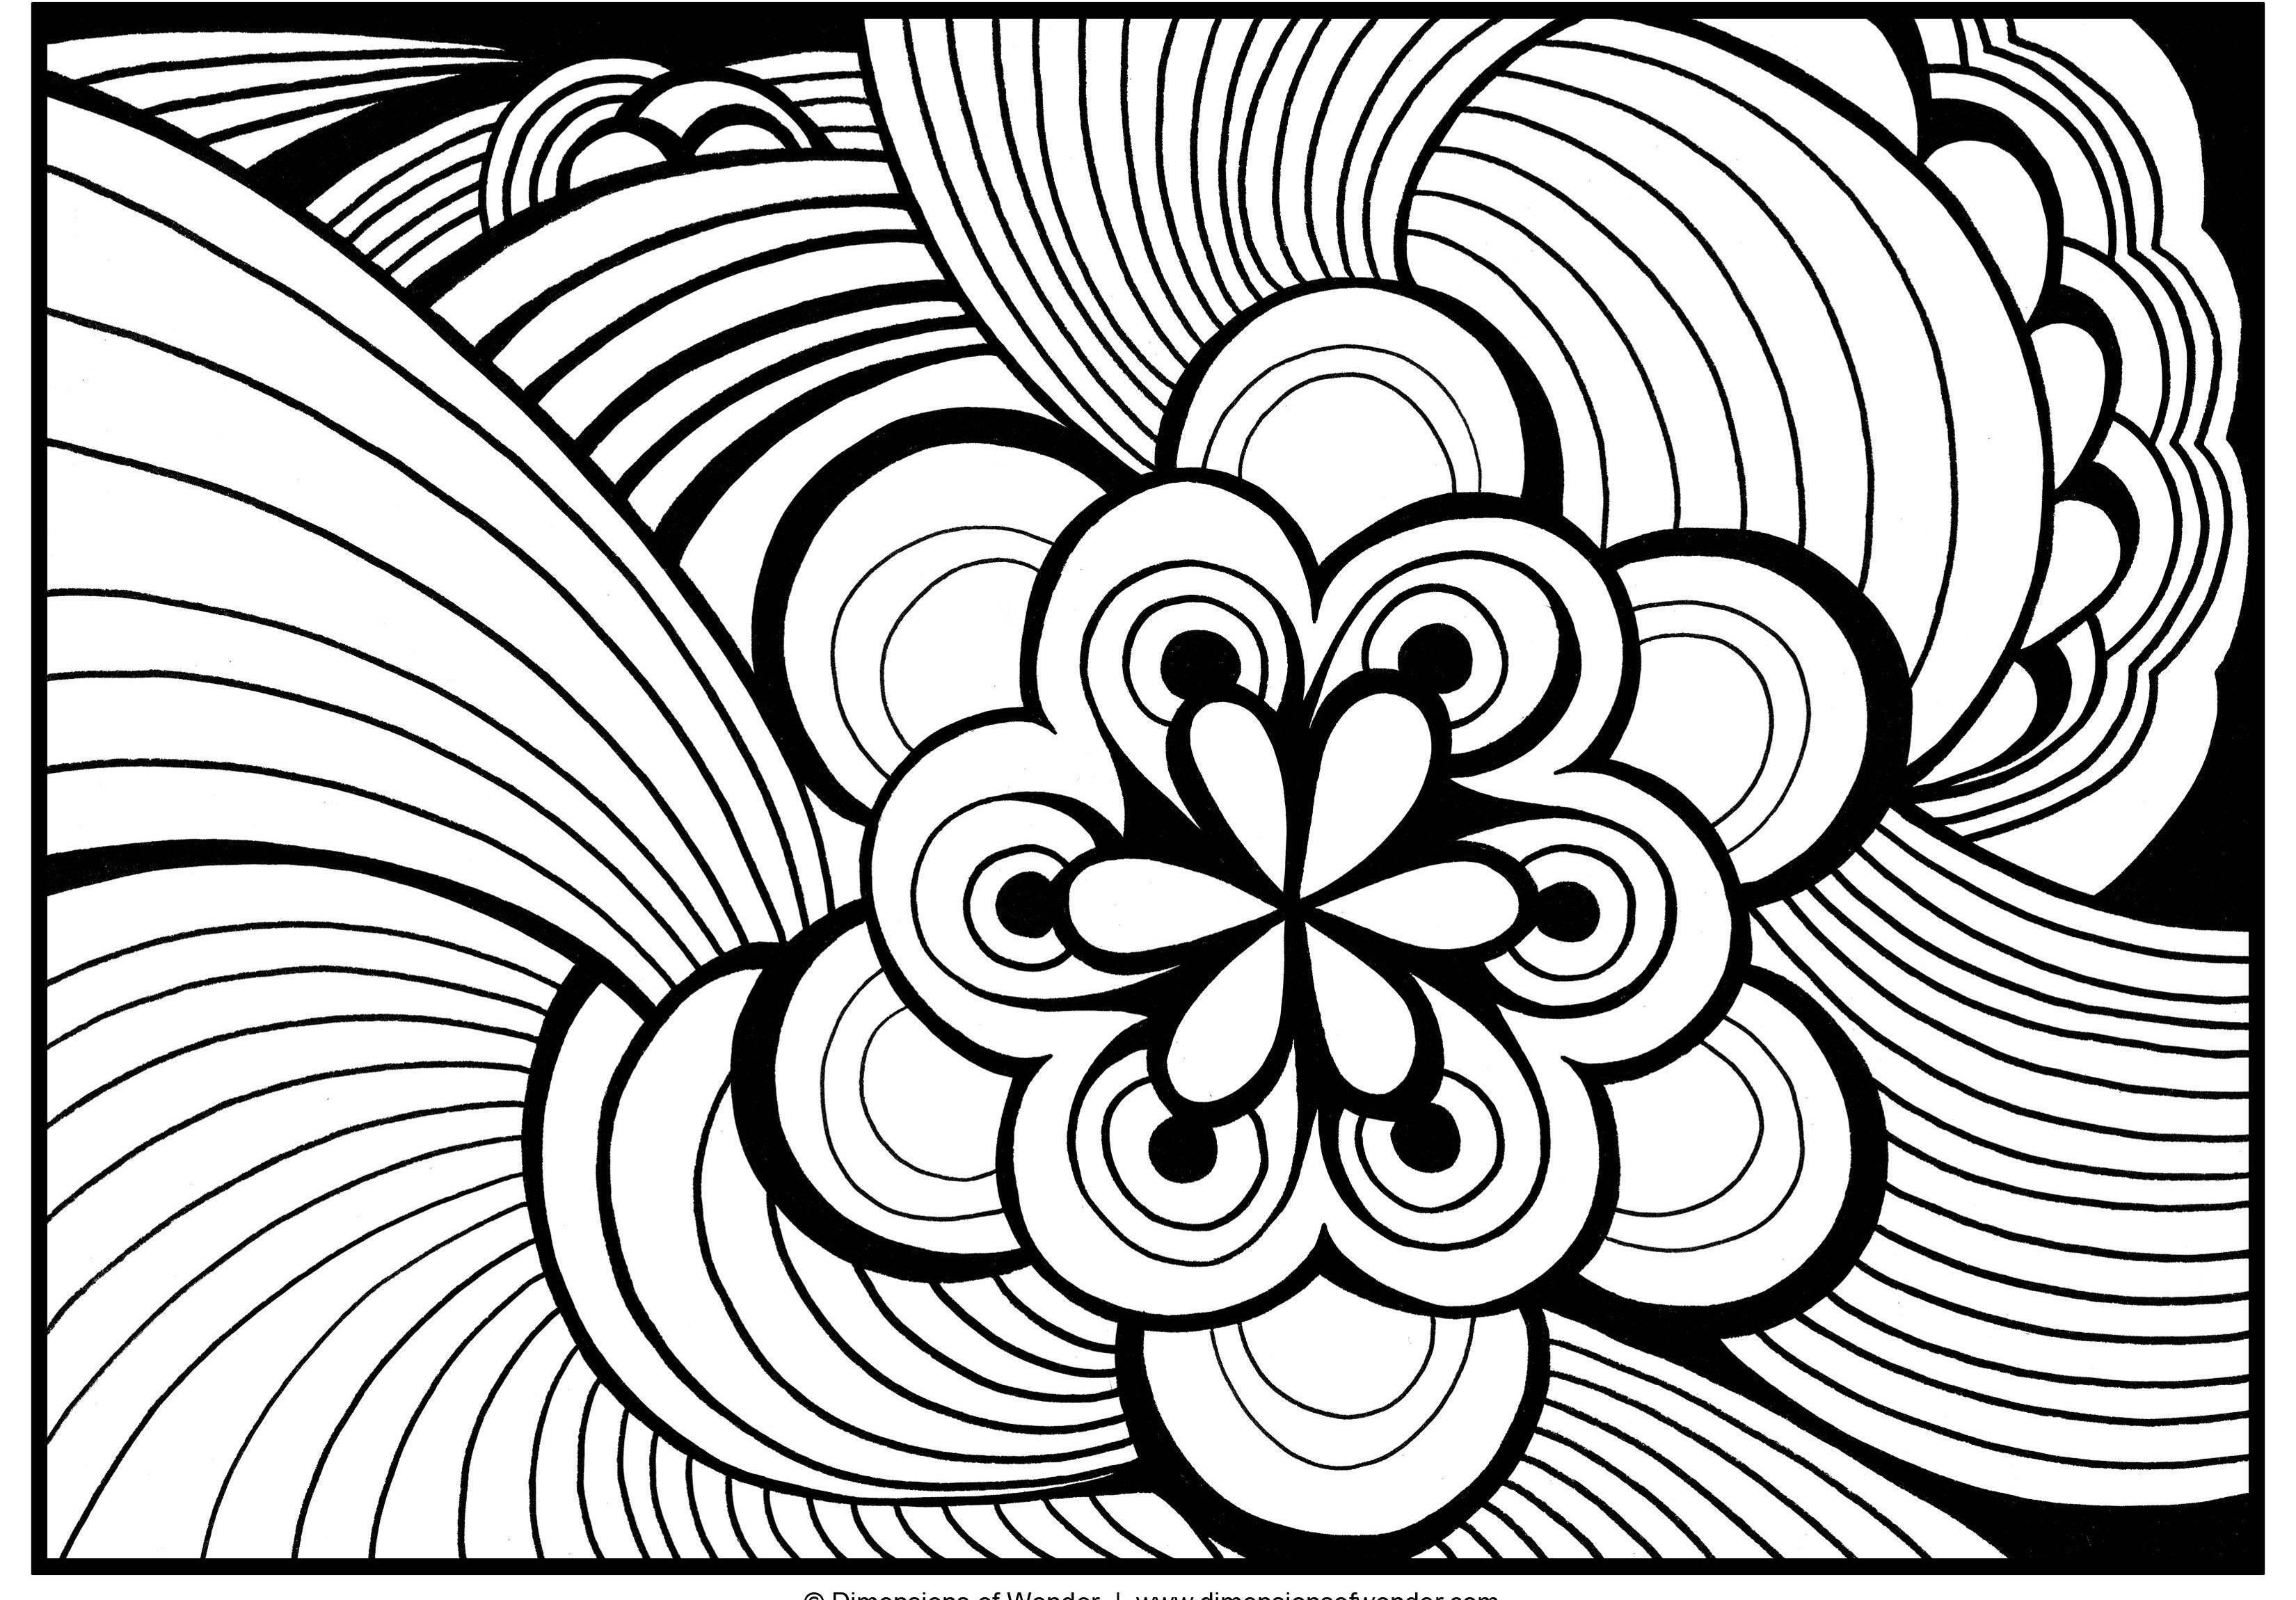 Printable Abstract Coloring Pages Nice - Coloring pages